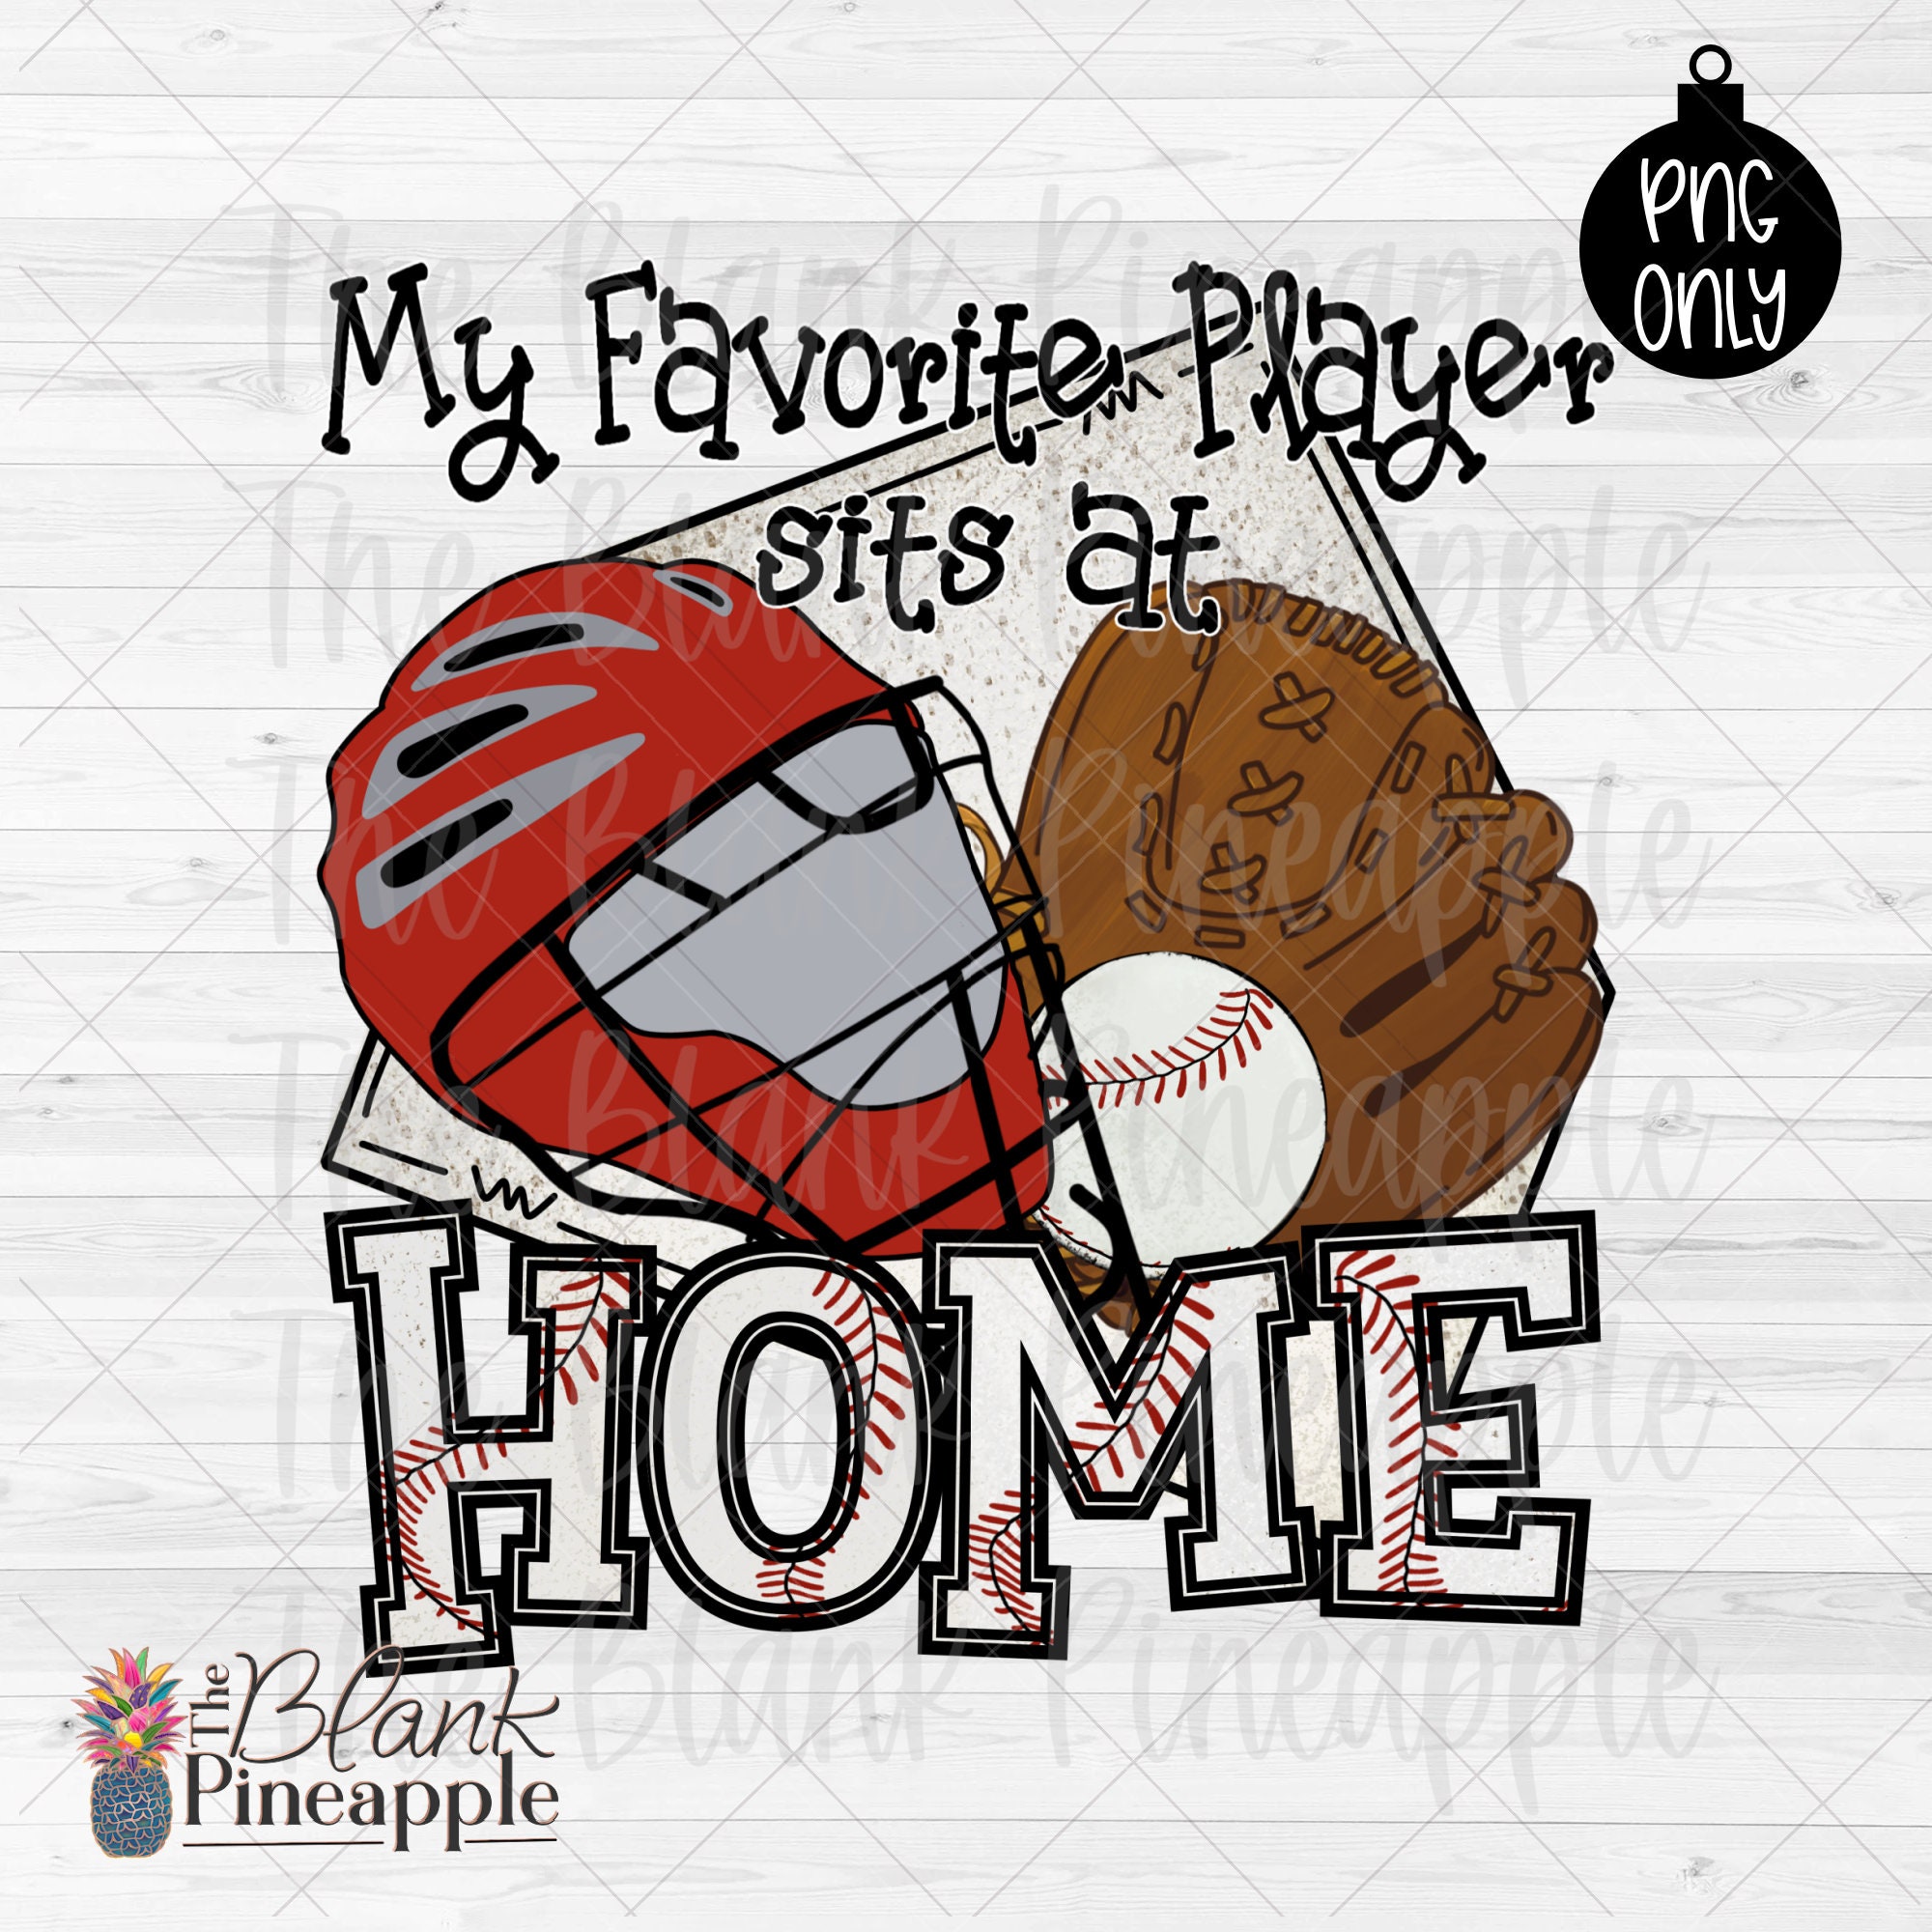 Baseball Icon - Catcher Graphic by MelindAgency · Creative Fabrica